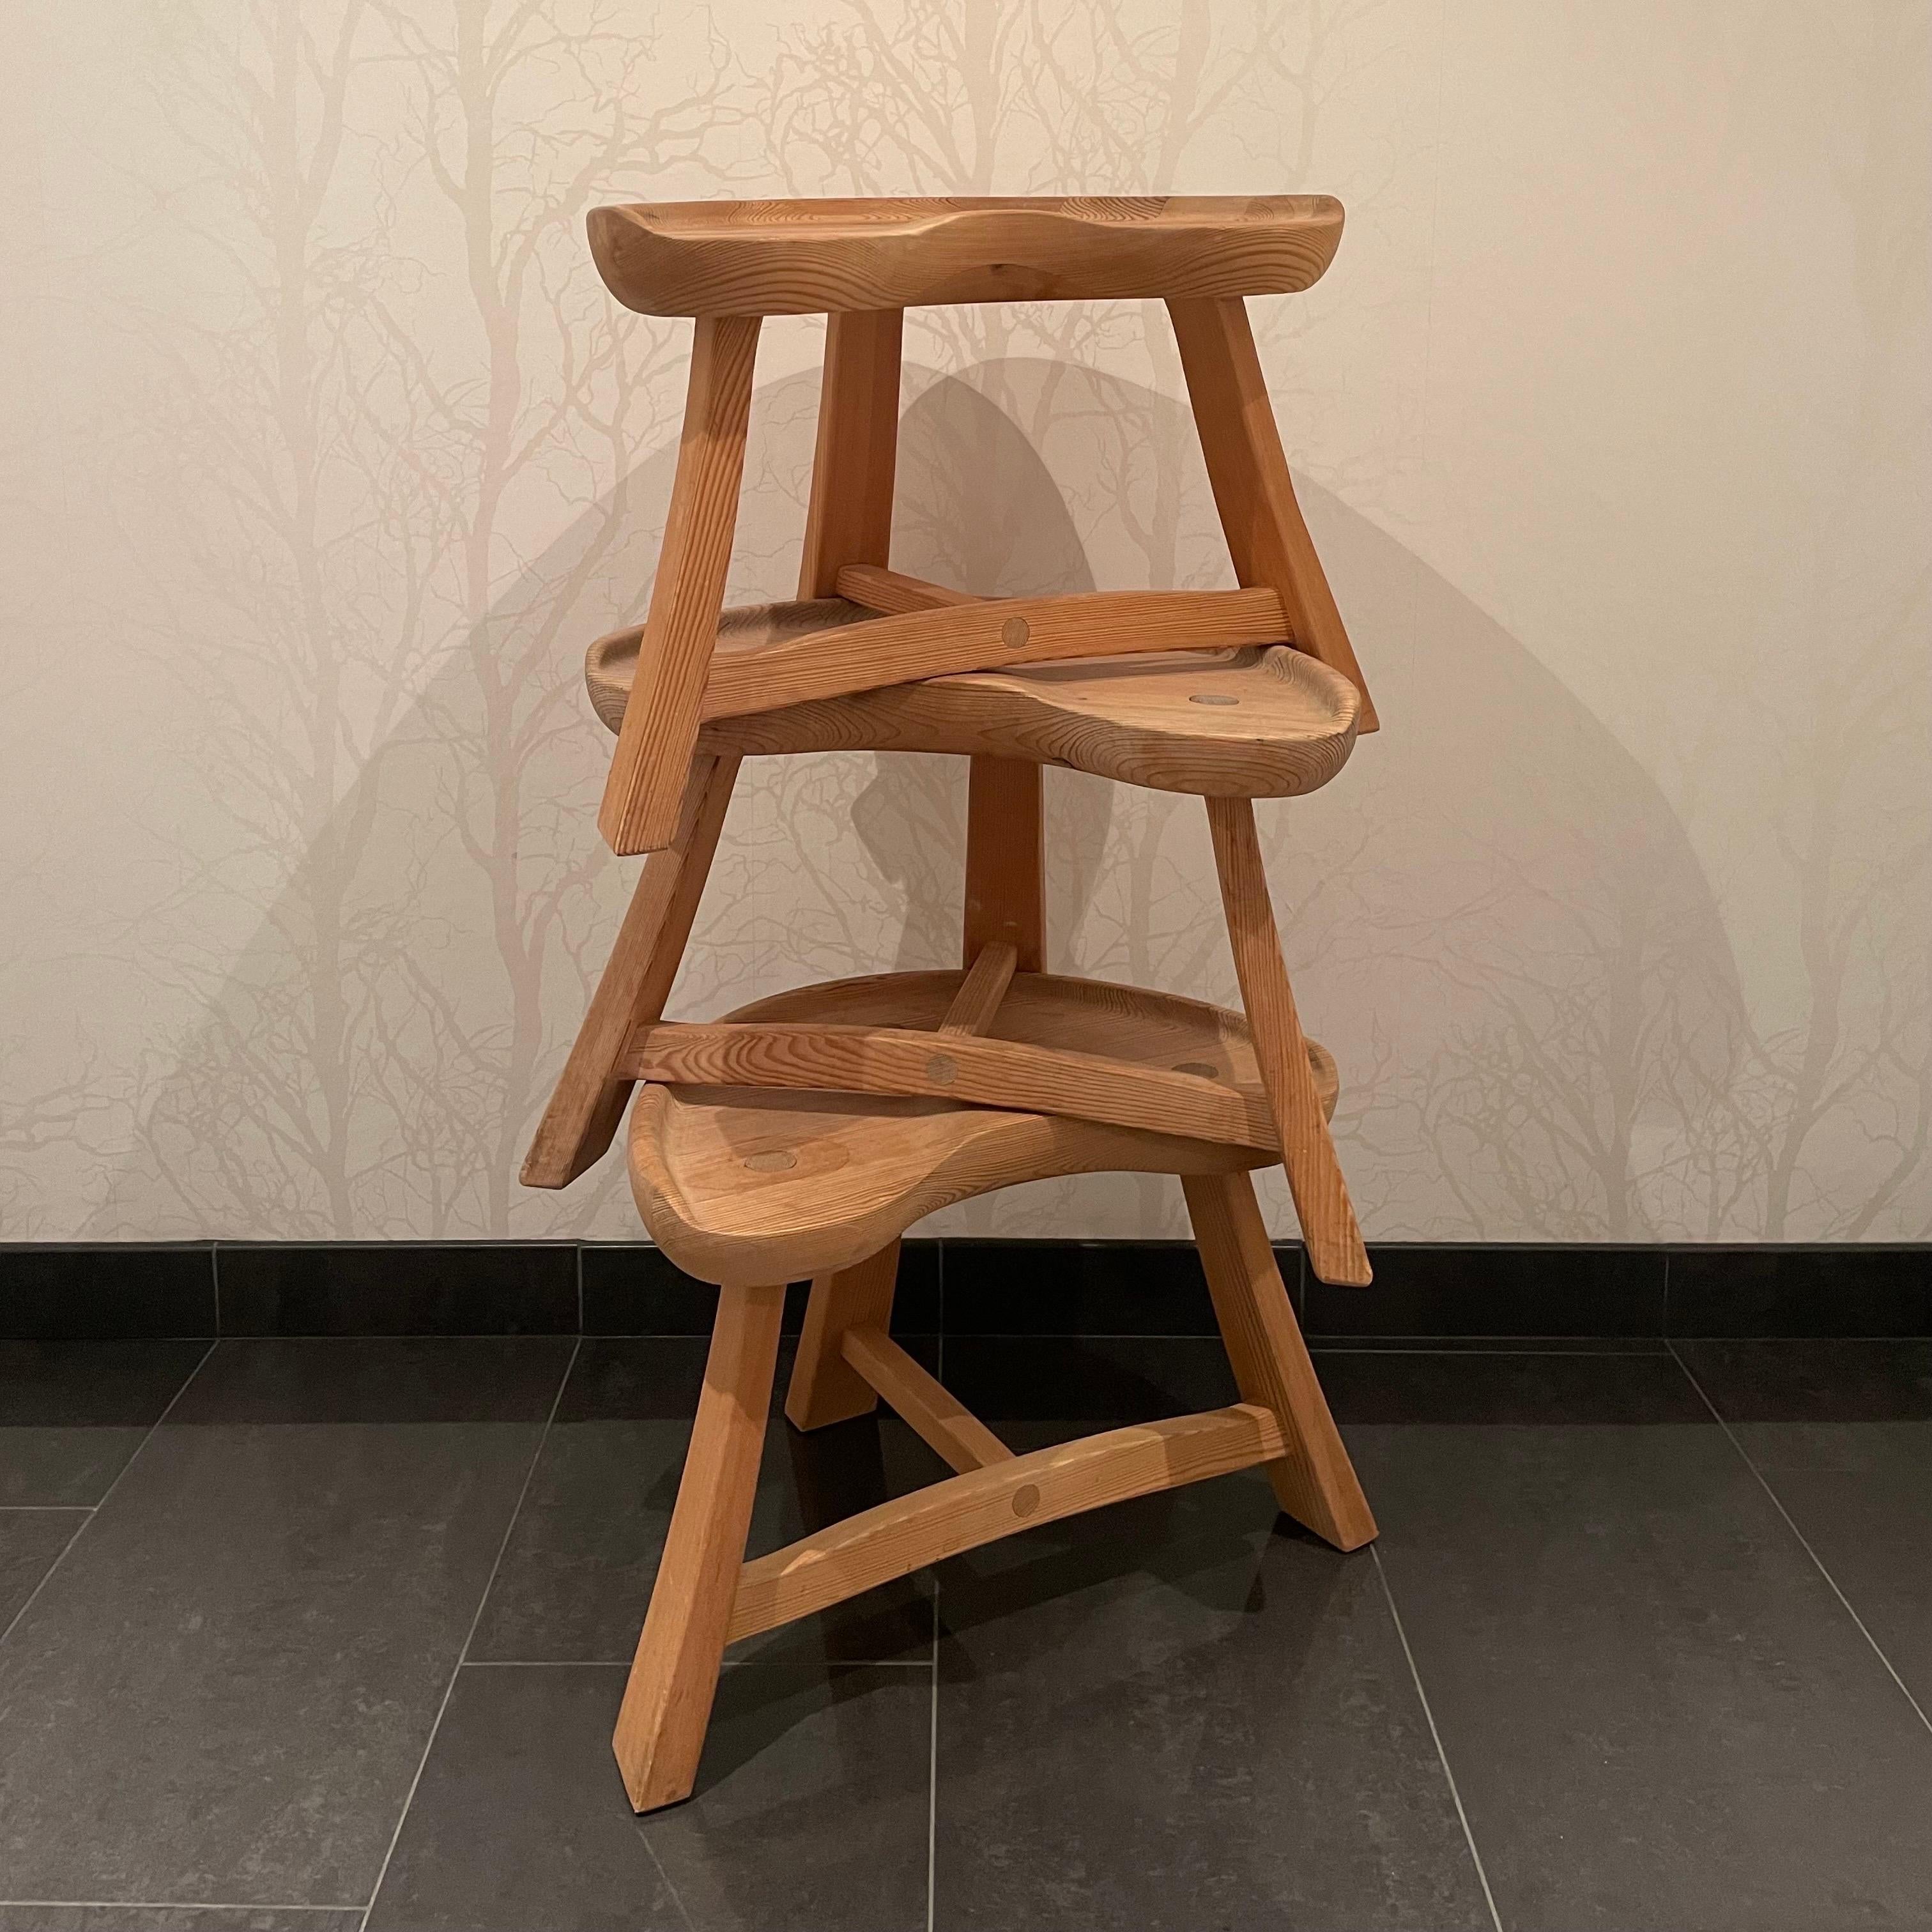 Hand-Crafted Scandinavian / Norwegian Stool Model 522 Collection in Pine by Krogenaes Möbler For Sale